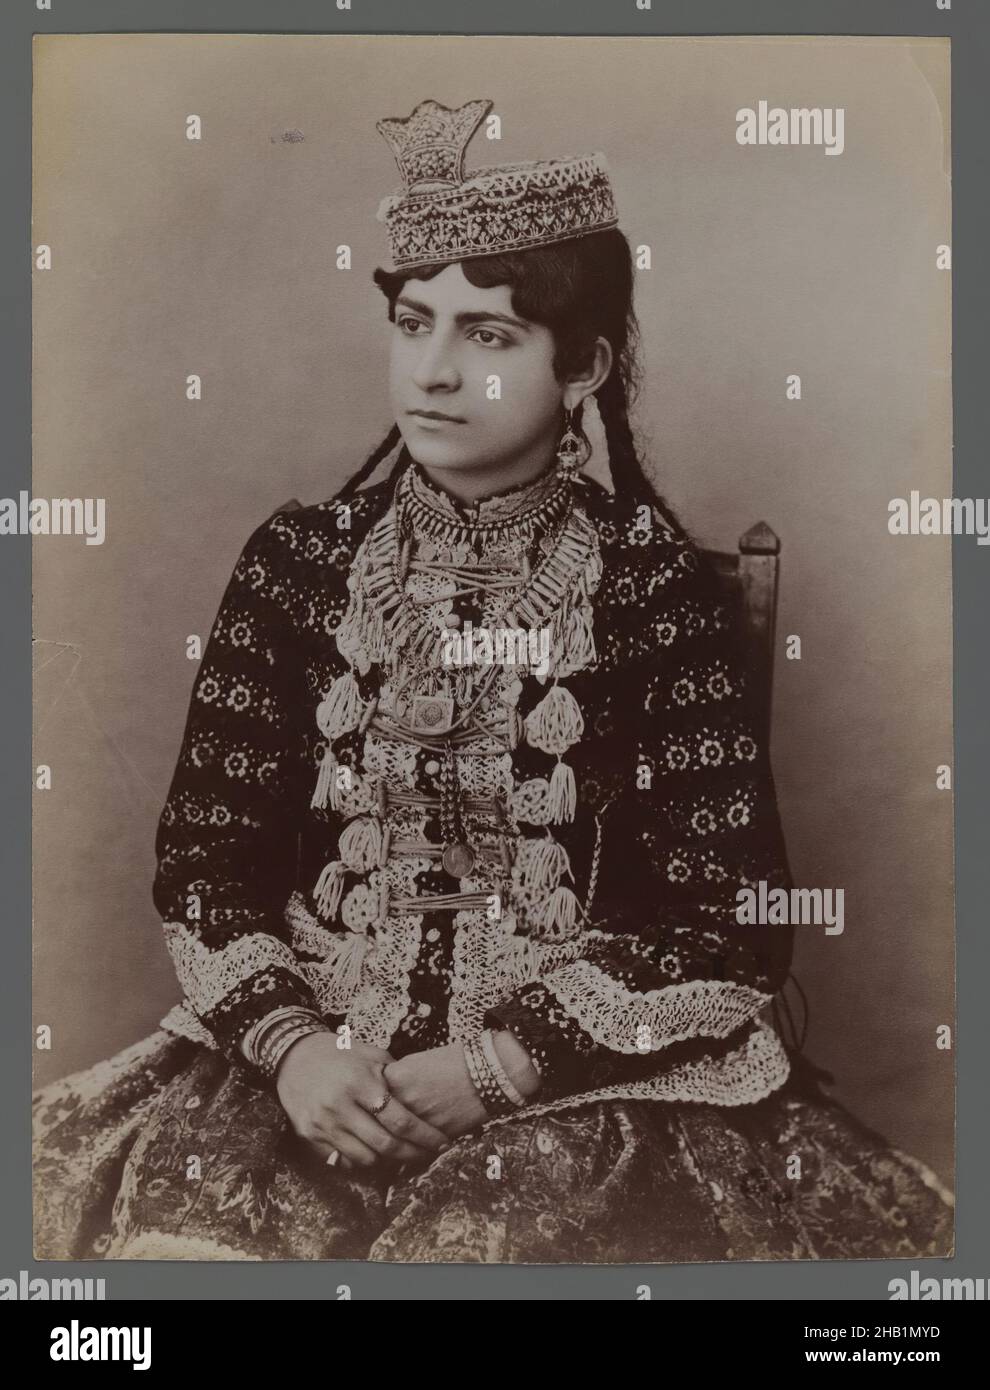 Young Girl in Urban Dress, featuring Hat with Crown Ornament, One of 274 Vintage Photographs, Albumen silver photograph, late 19th-early 20th century, Qajar, Qajar Period, 8 3/16 x 6 1/8 in., 20.8 x 15.6 cm Stock Photo